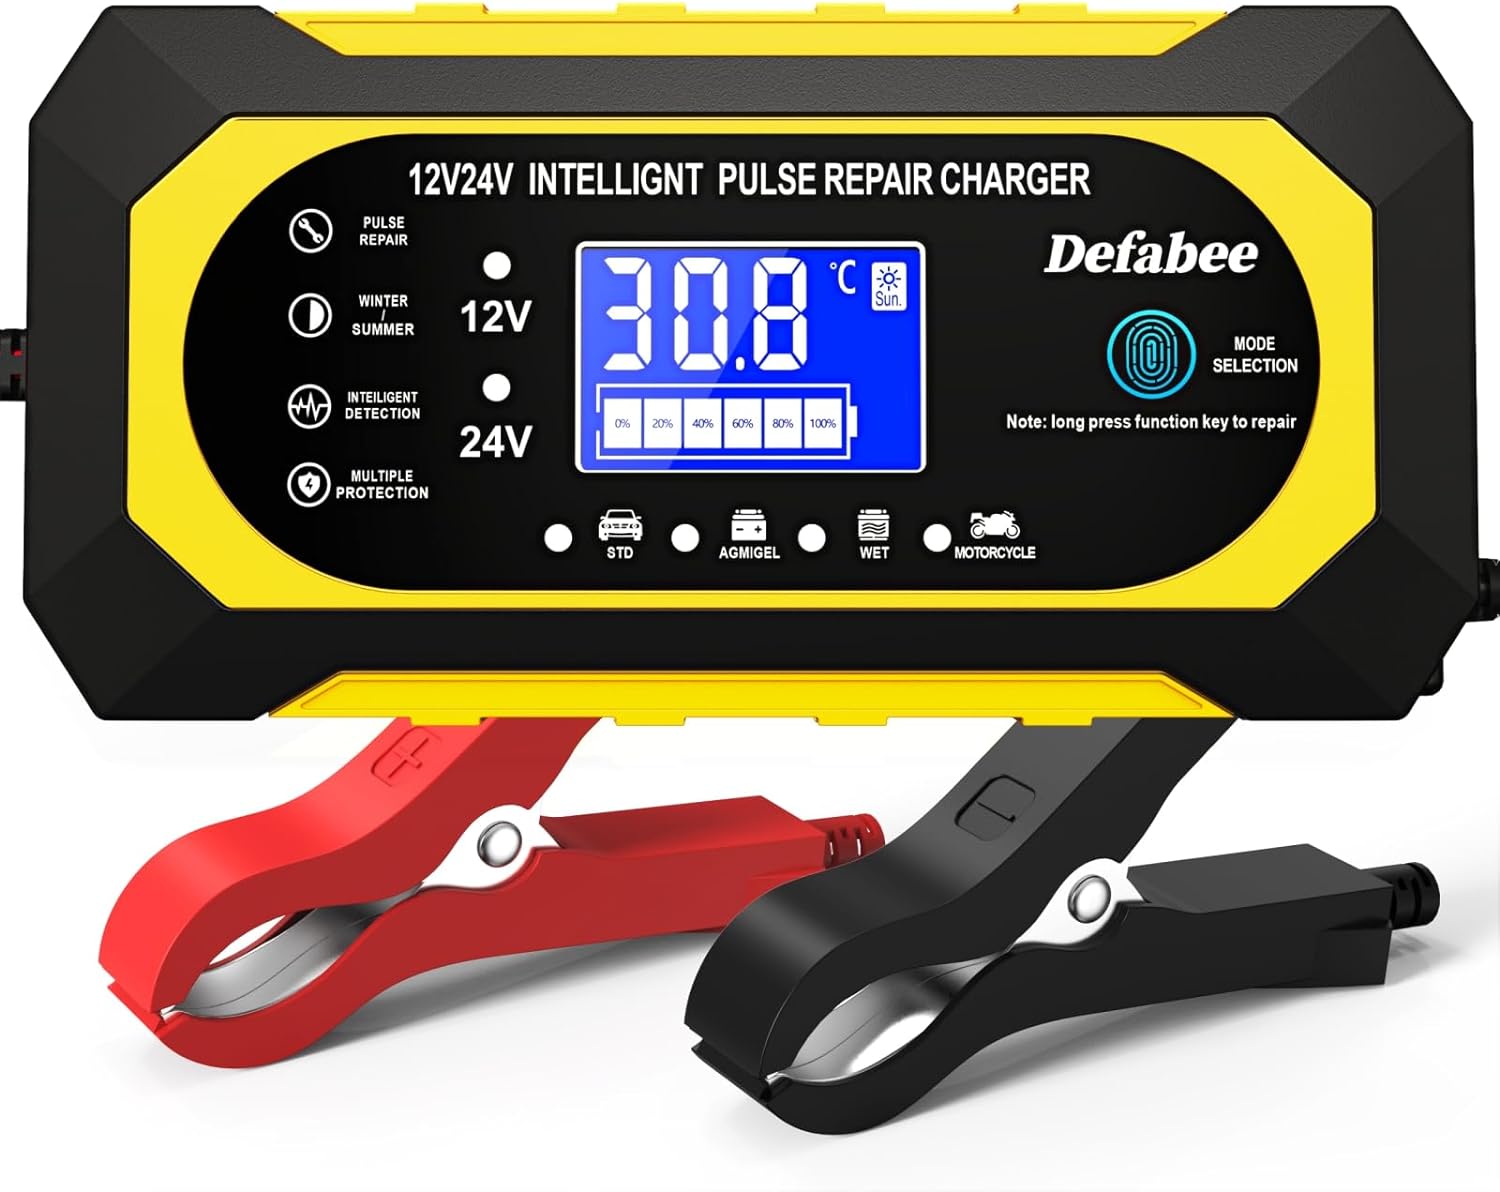 Defabee Car Battery Charger, 10-Amp 12V and 24V Smart Fully Automatic Temperature Compensation, Battery Charger Maintainer Trickle Charger for AGM Lead-Acid Batteries Truck Motorcycle Lawn Mower Boat - Defabee Car Battery Charger Review